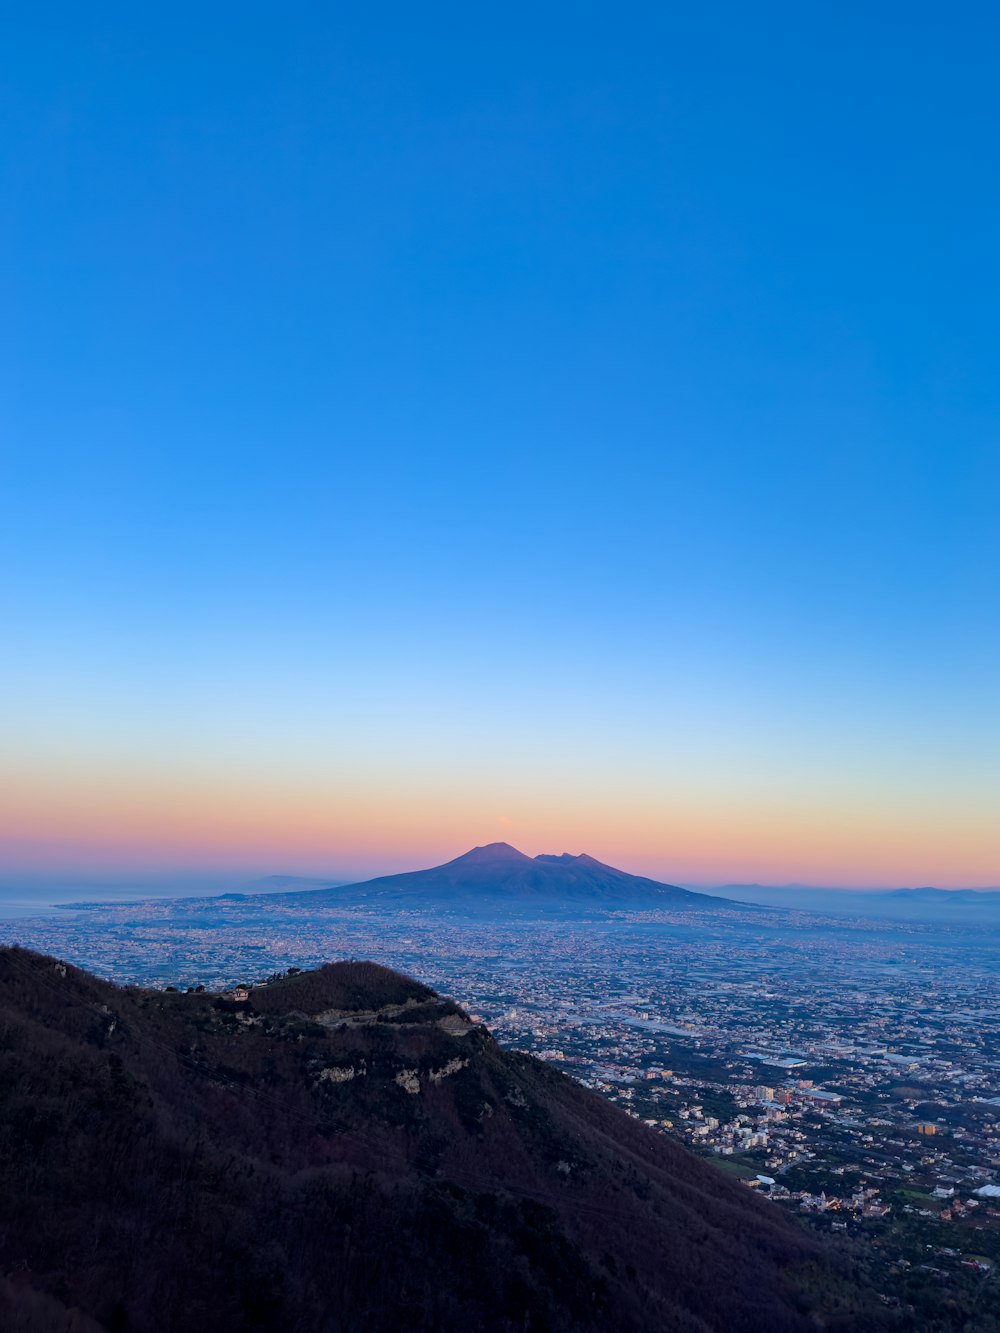 a view of a city and a mountain at sunset